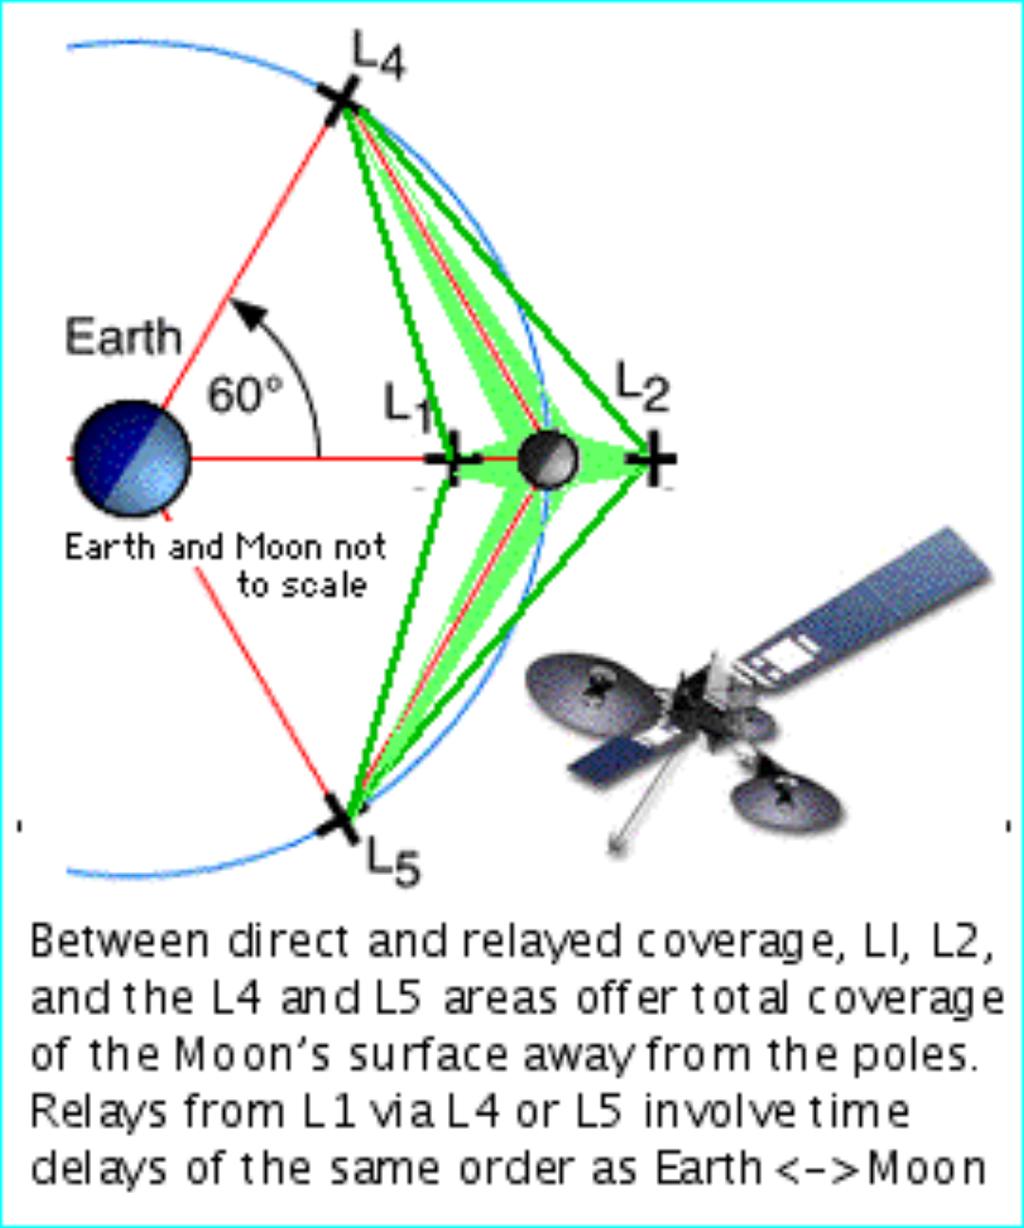 L1 Gateway: Phase 1: L1, along with sister relaysats can provide global coverage L1 can cover most of nearside Similar relays at L4 and L5 would overlap that coverage and reach much of the Moon s